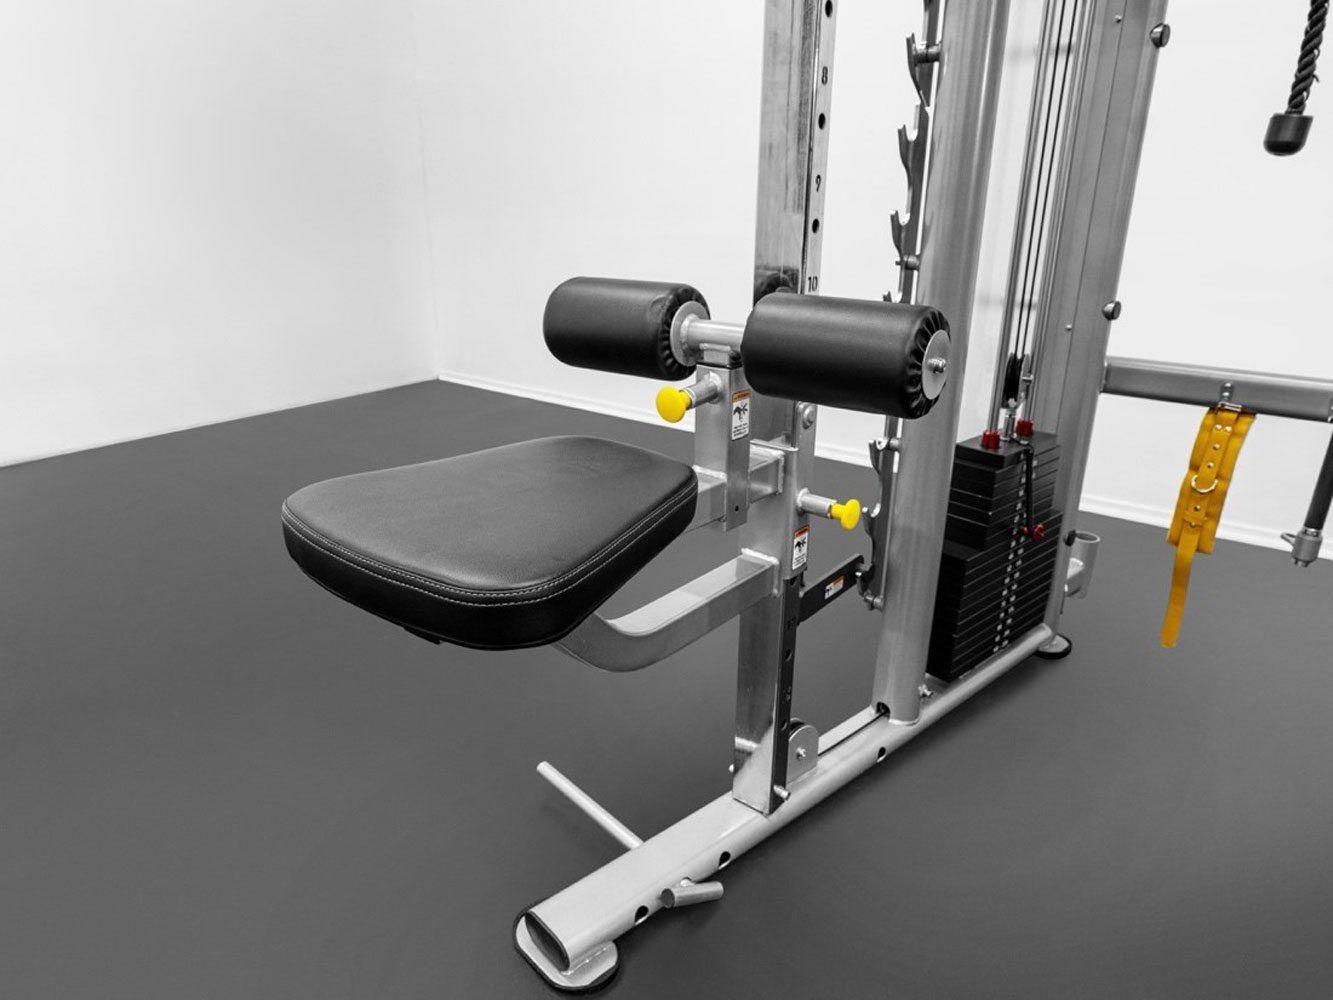 Lat Pull Down Seat Add-On (optional)